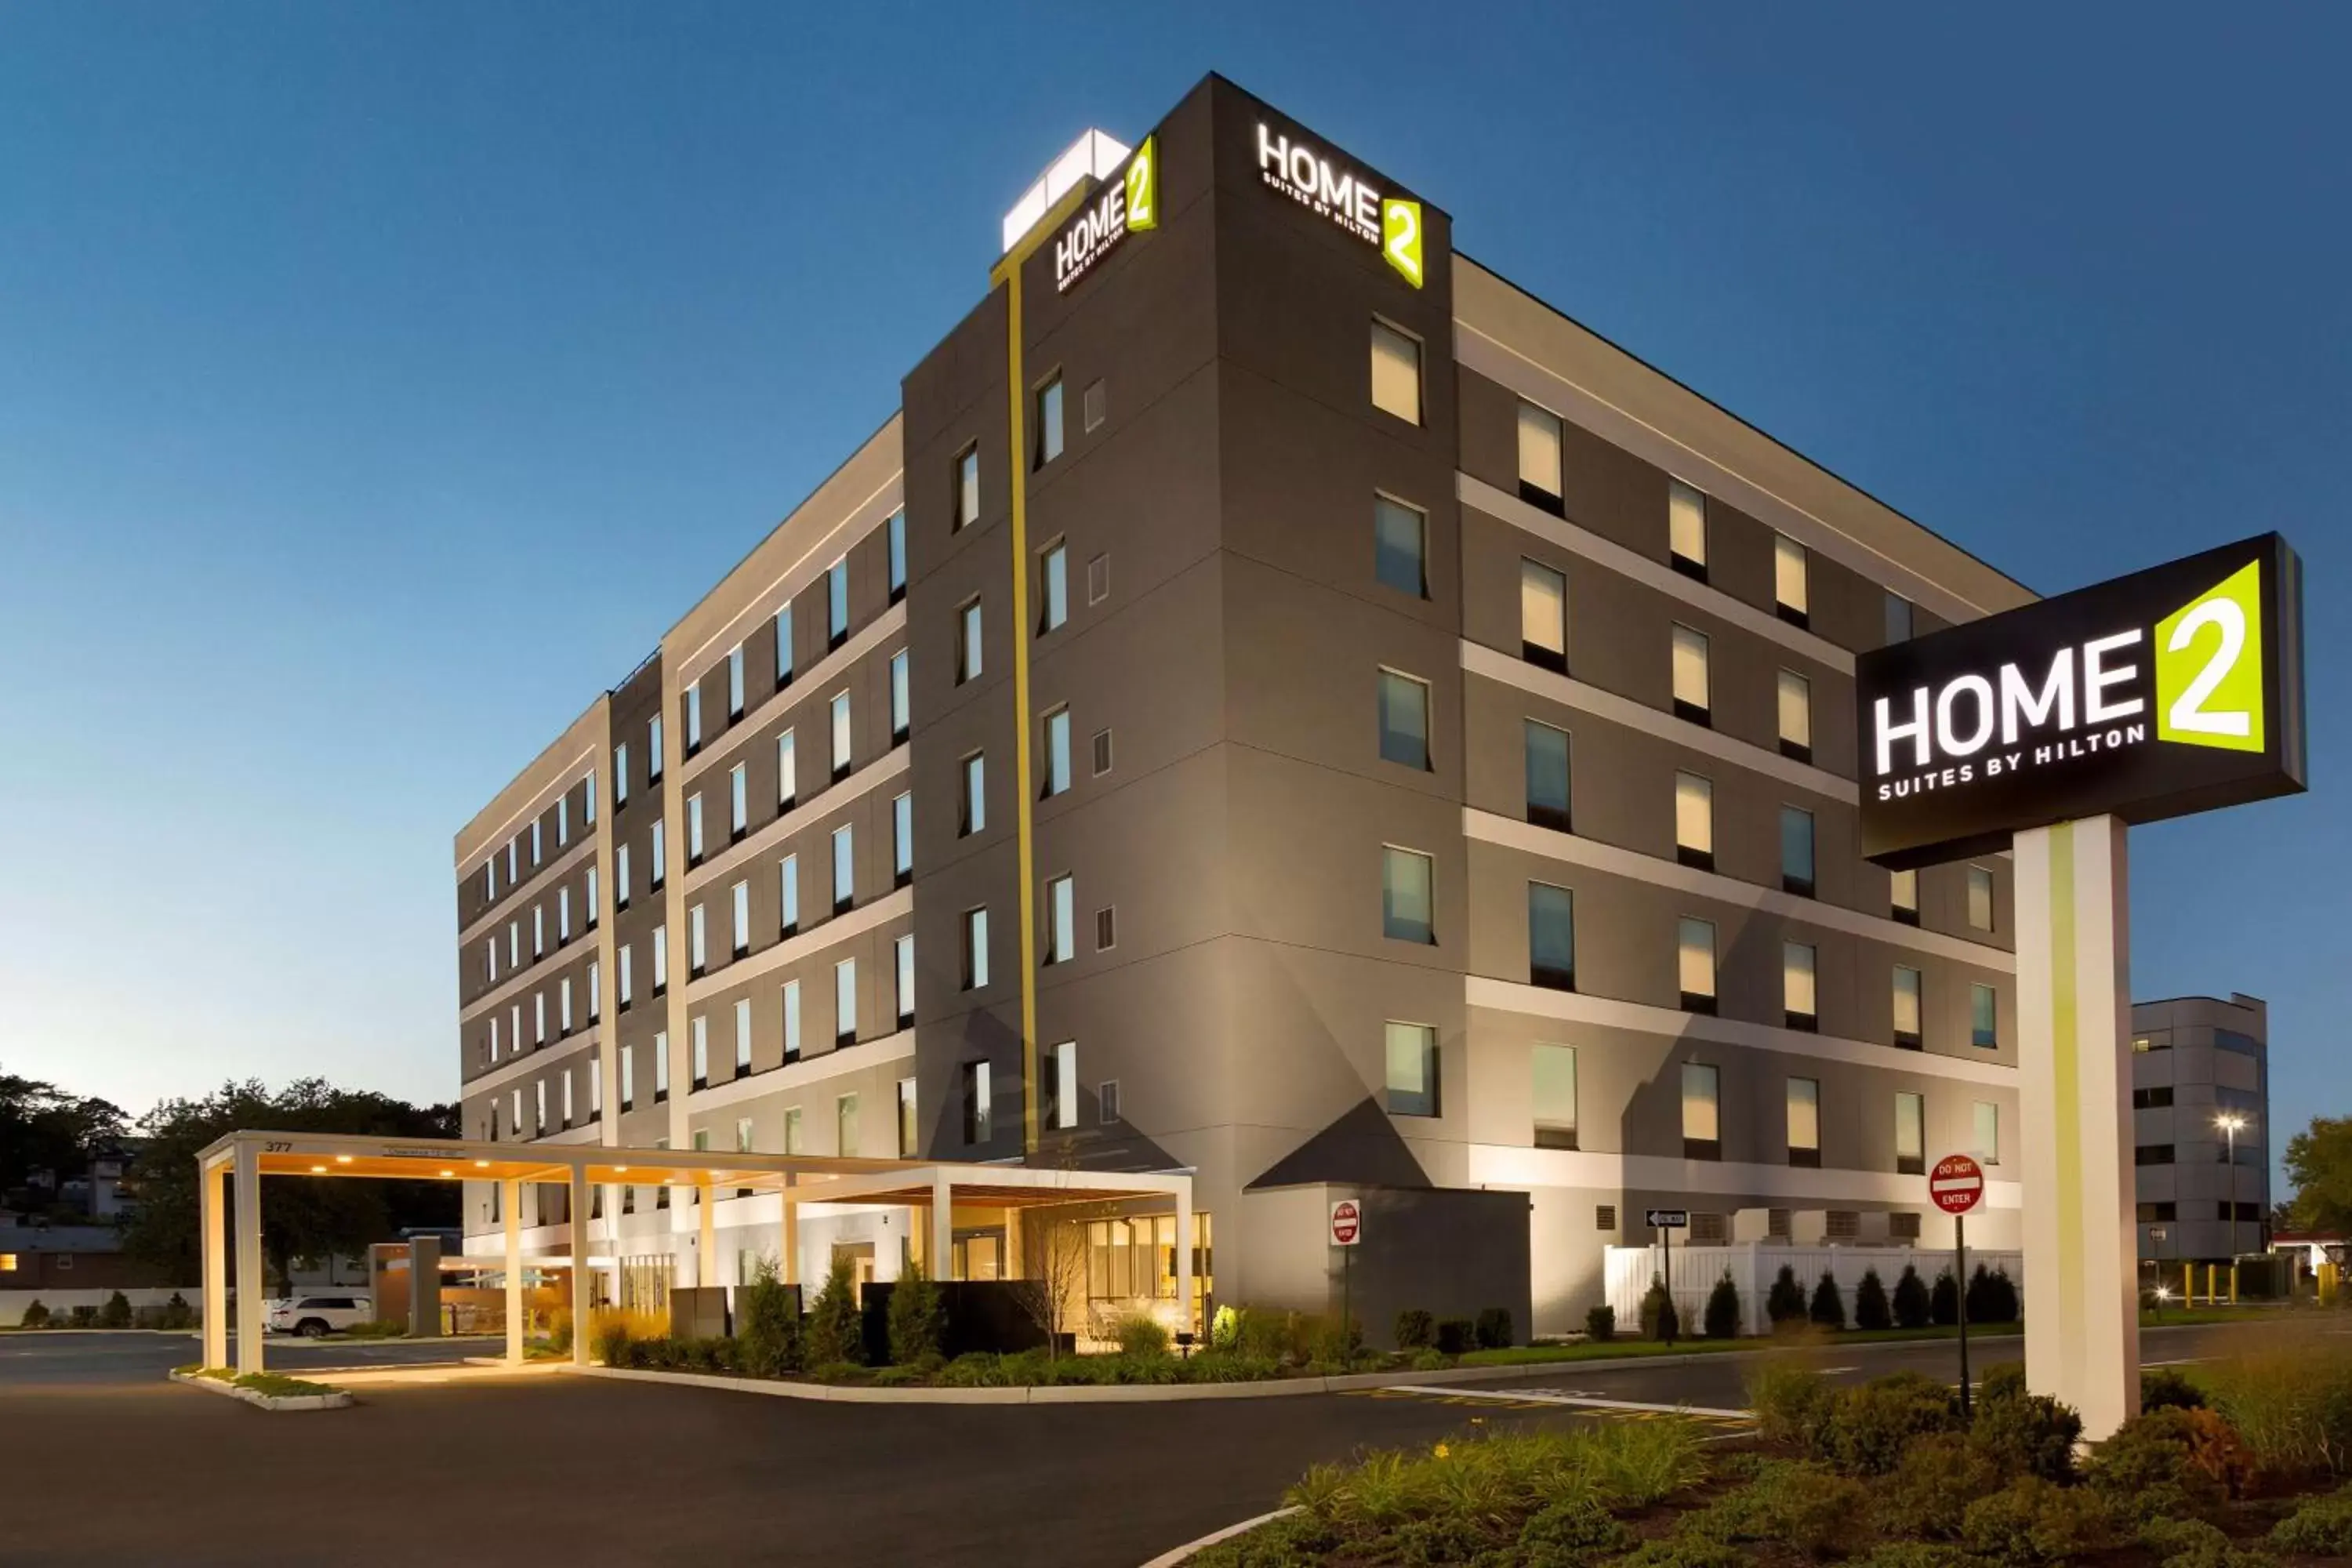 Property Building in Home2 Suites By Hilton Hasbrouck Heights